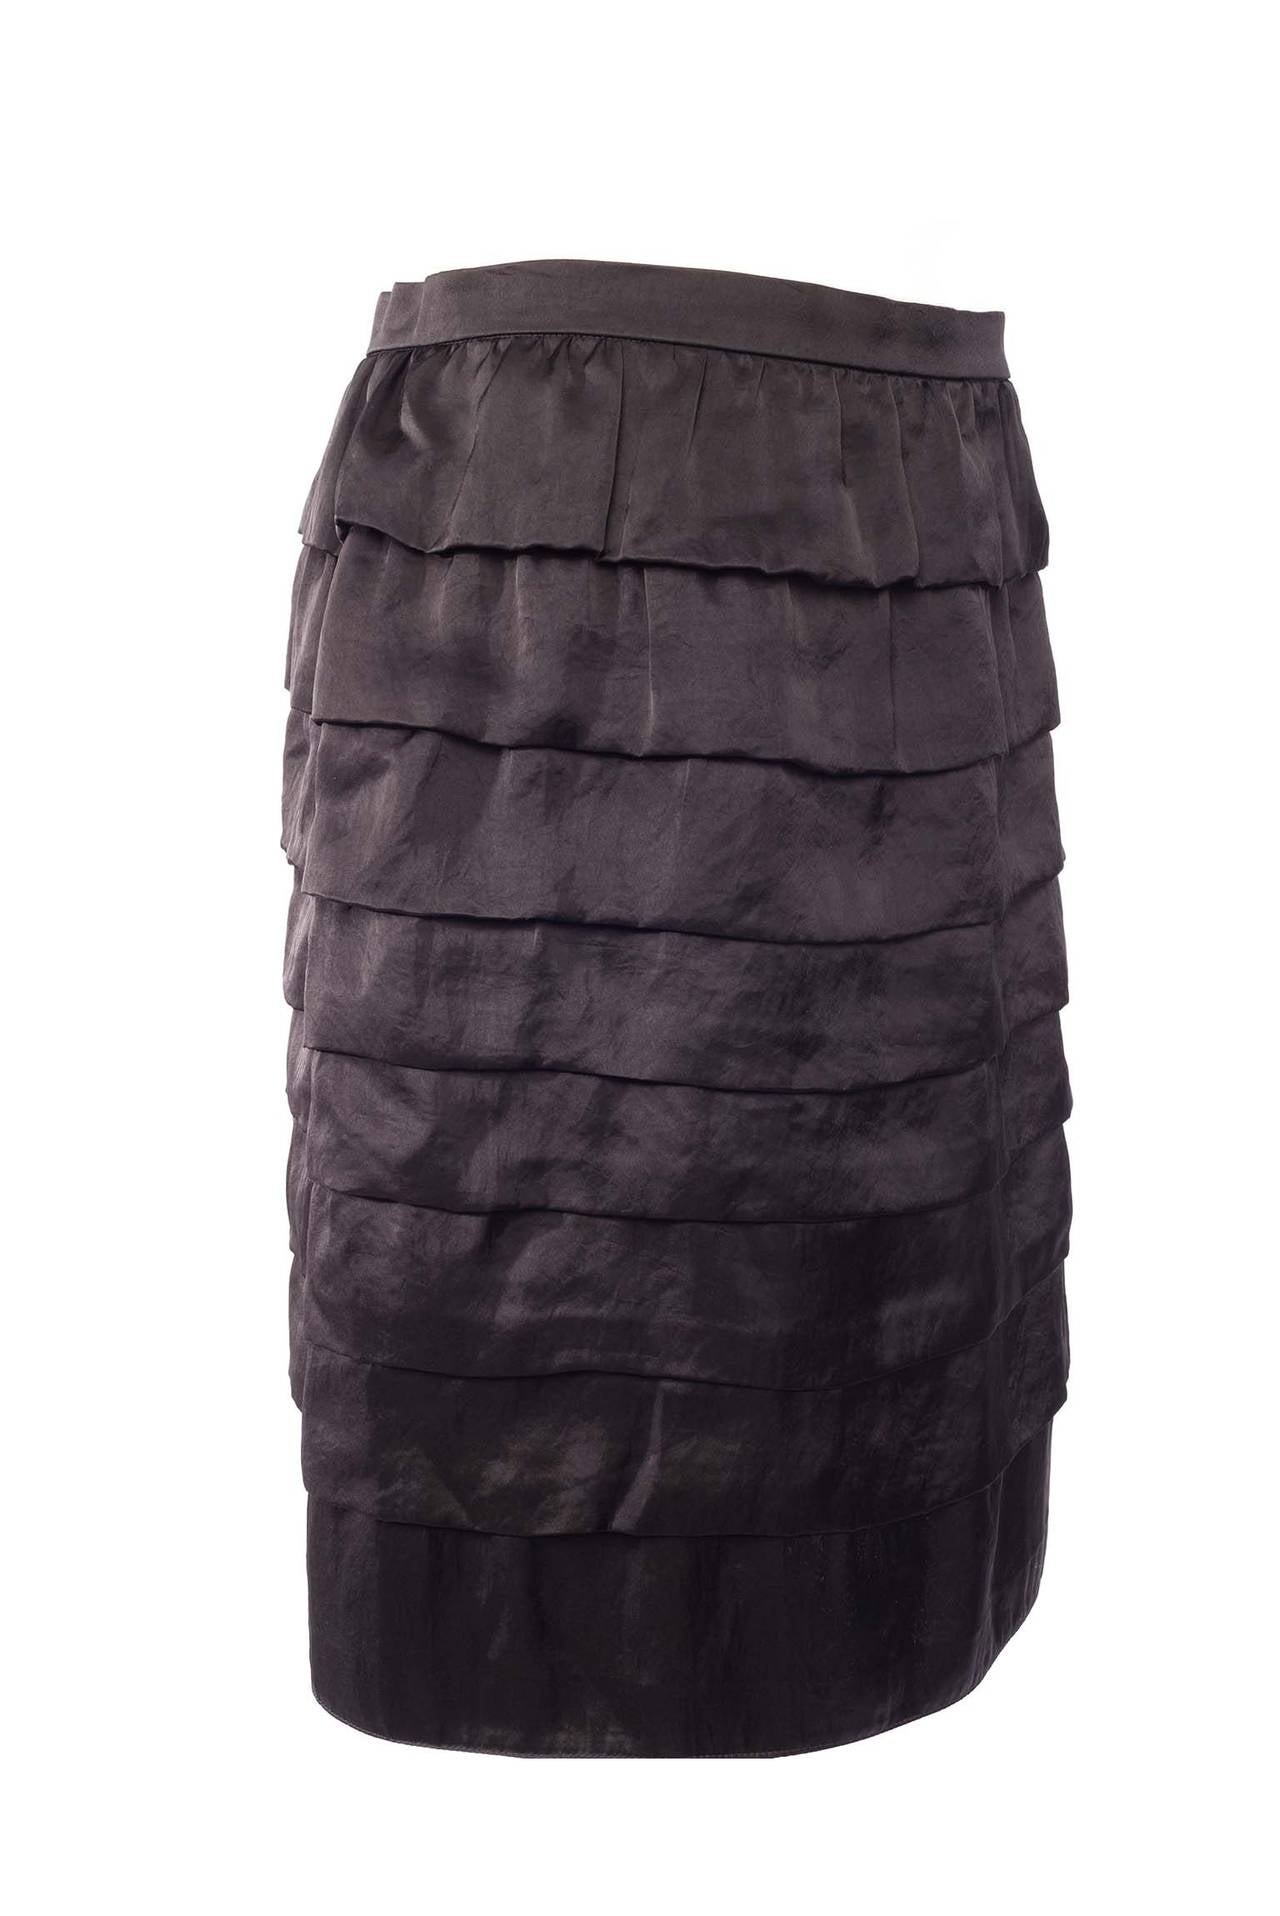 Lanvin black tired skirt from winter 2006. Skirt has 7 tiers, fully lined, waistband and side zipper.